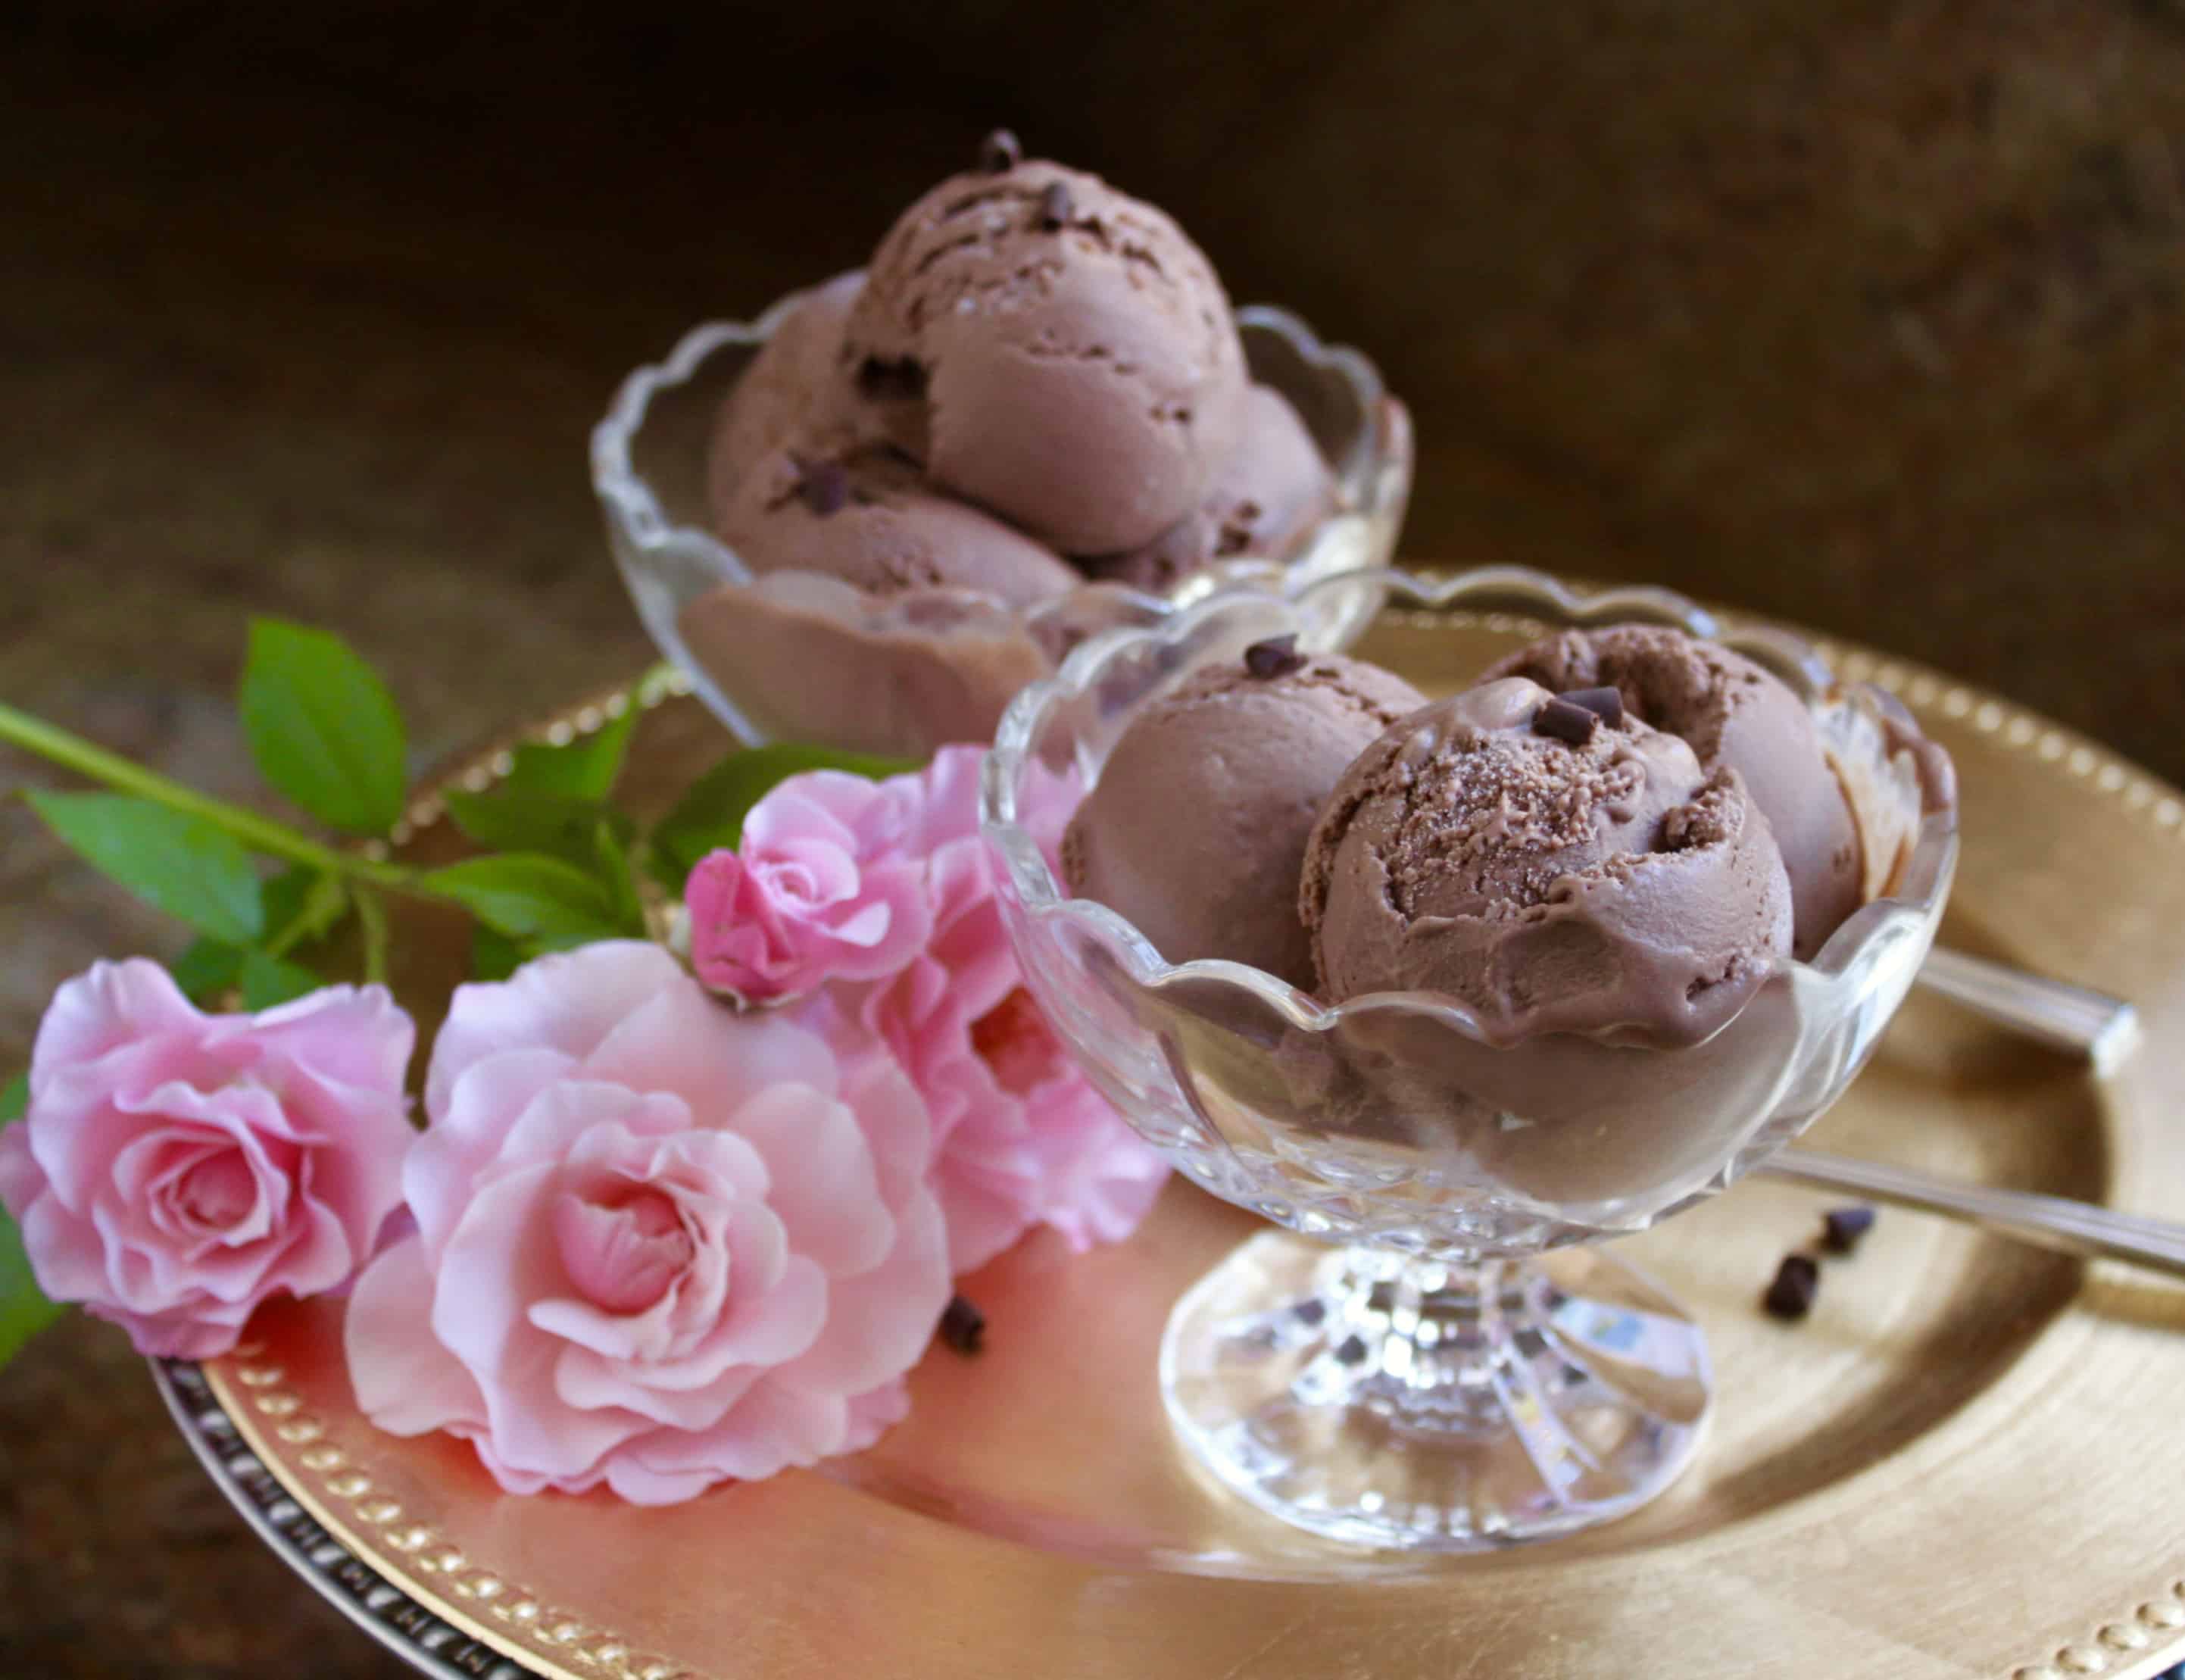 Best ever chocolate custard ice cream in bowls with pink roses